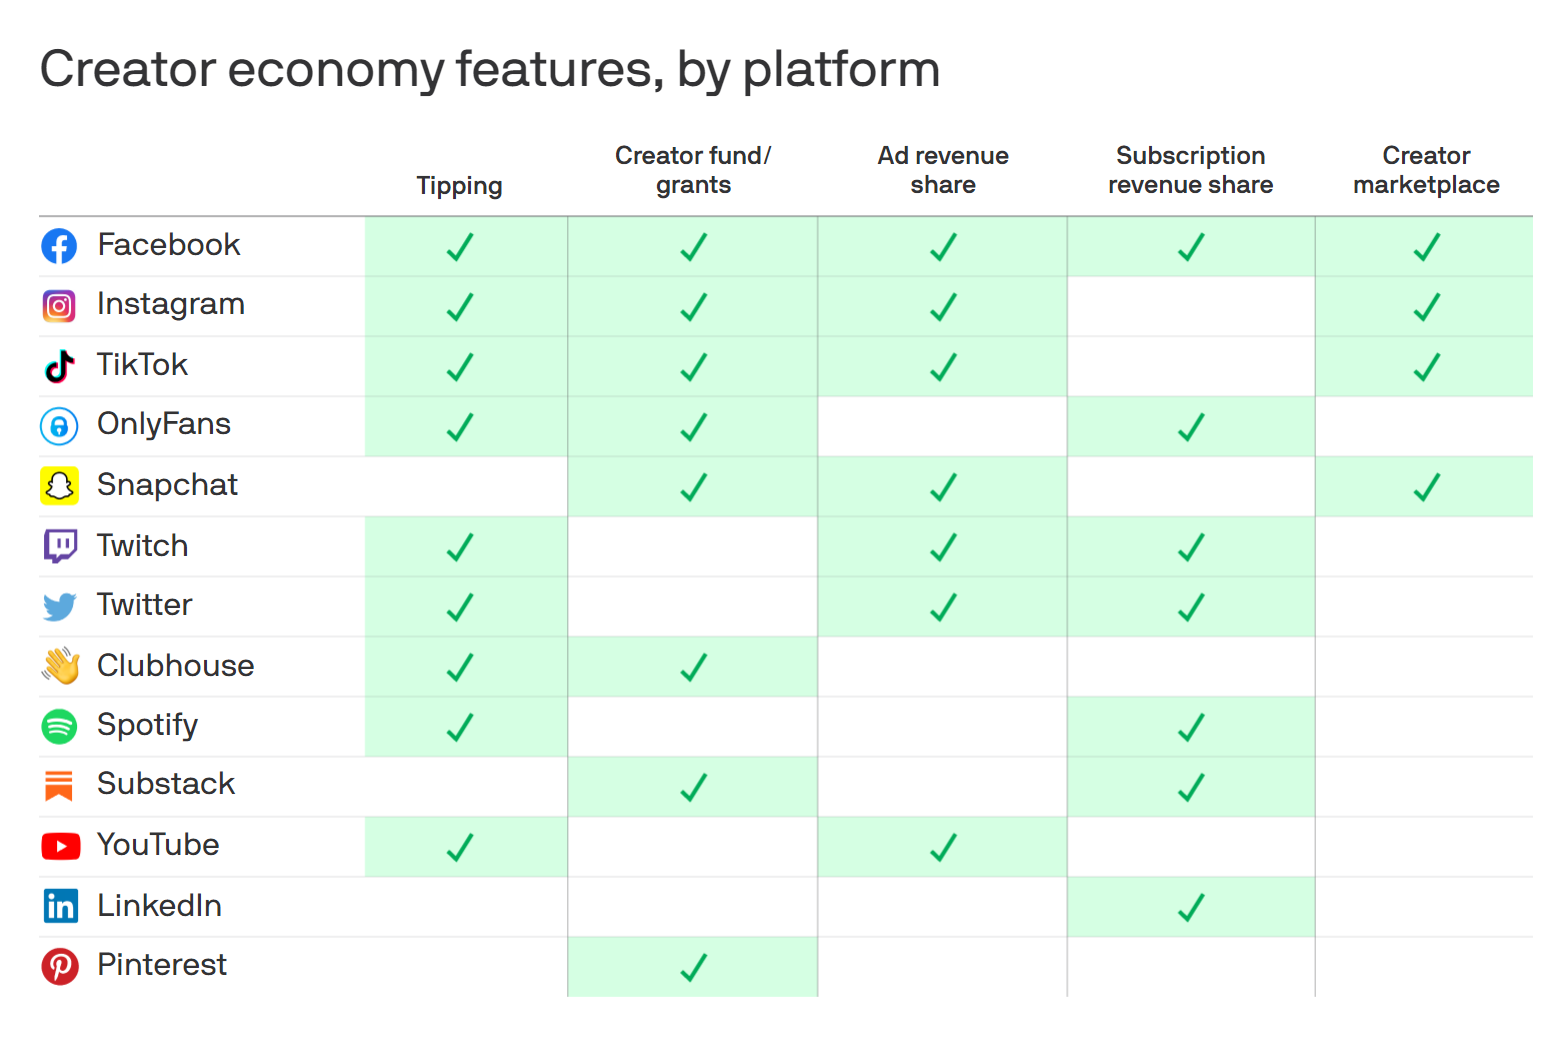 graphic showing creator economy features by platform